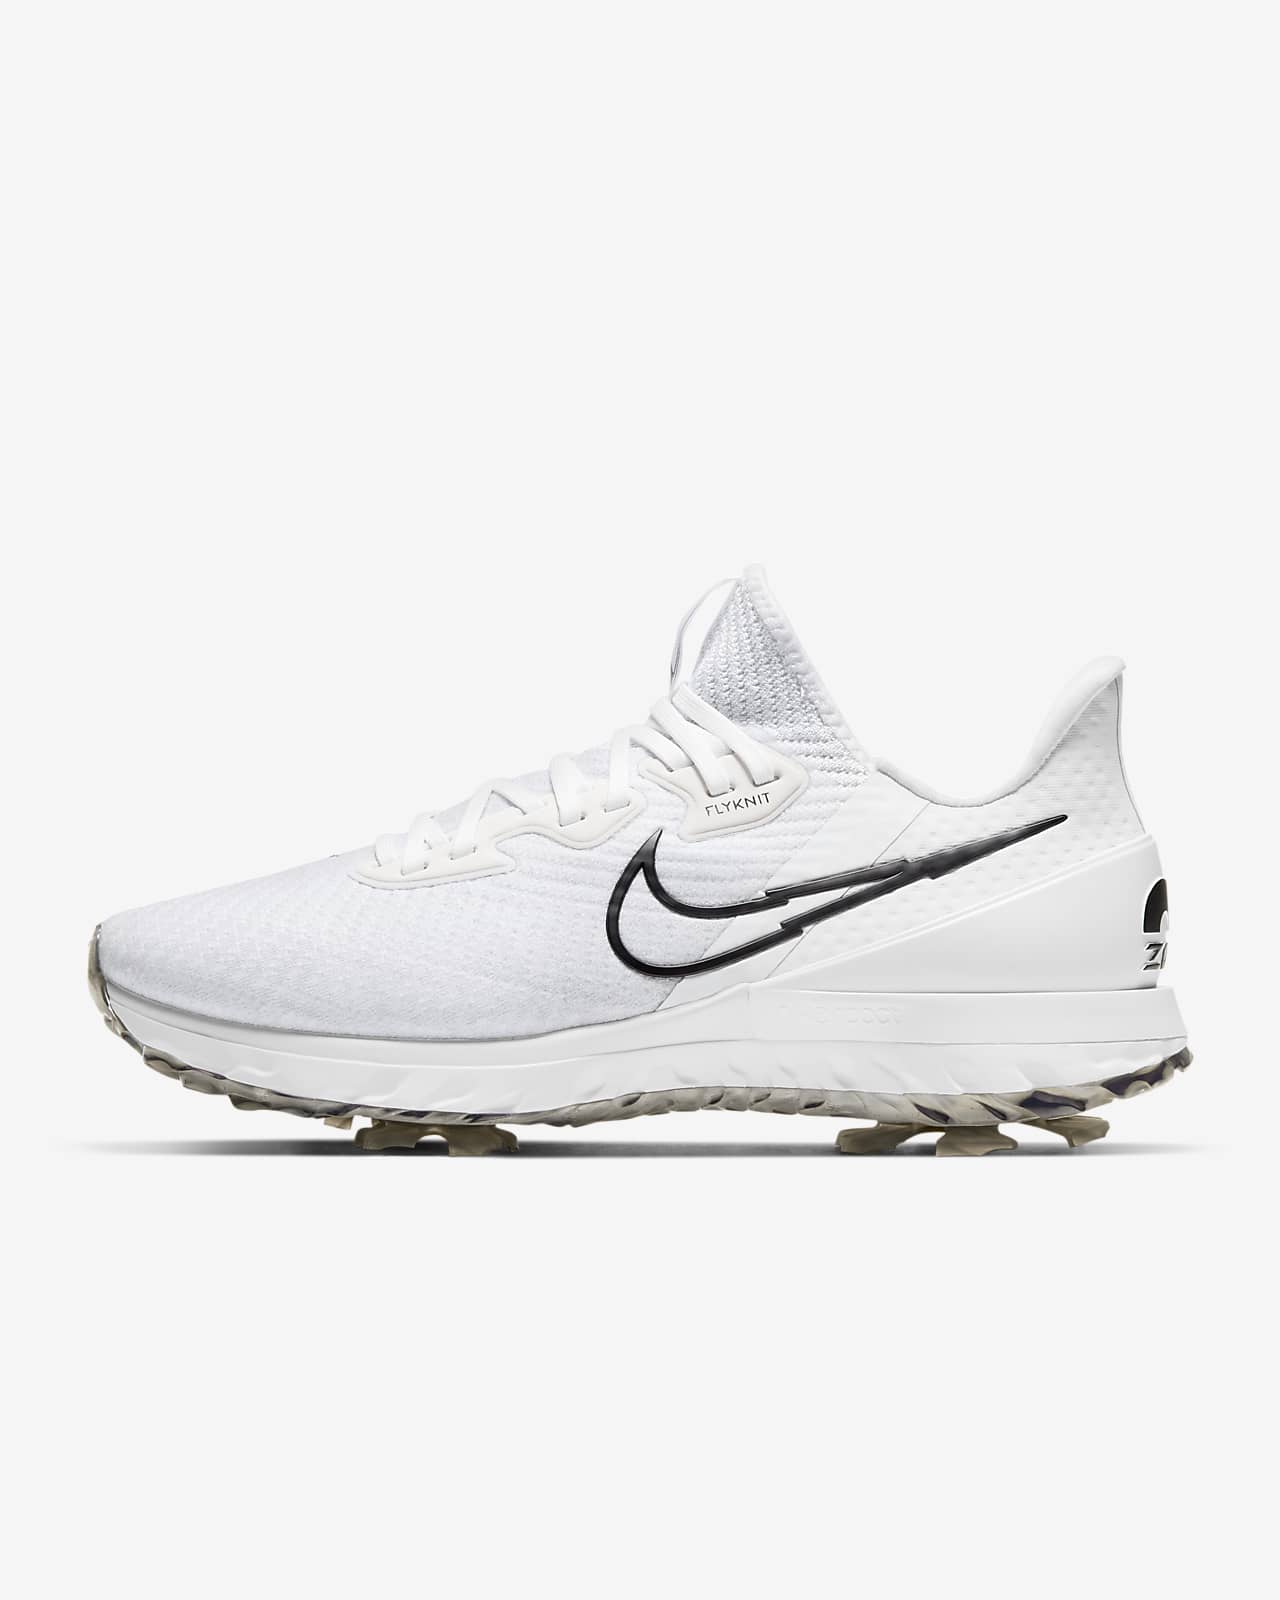 nike air infinity tour golf shoes